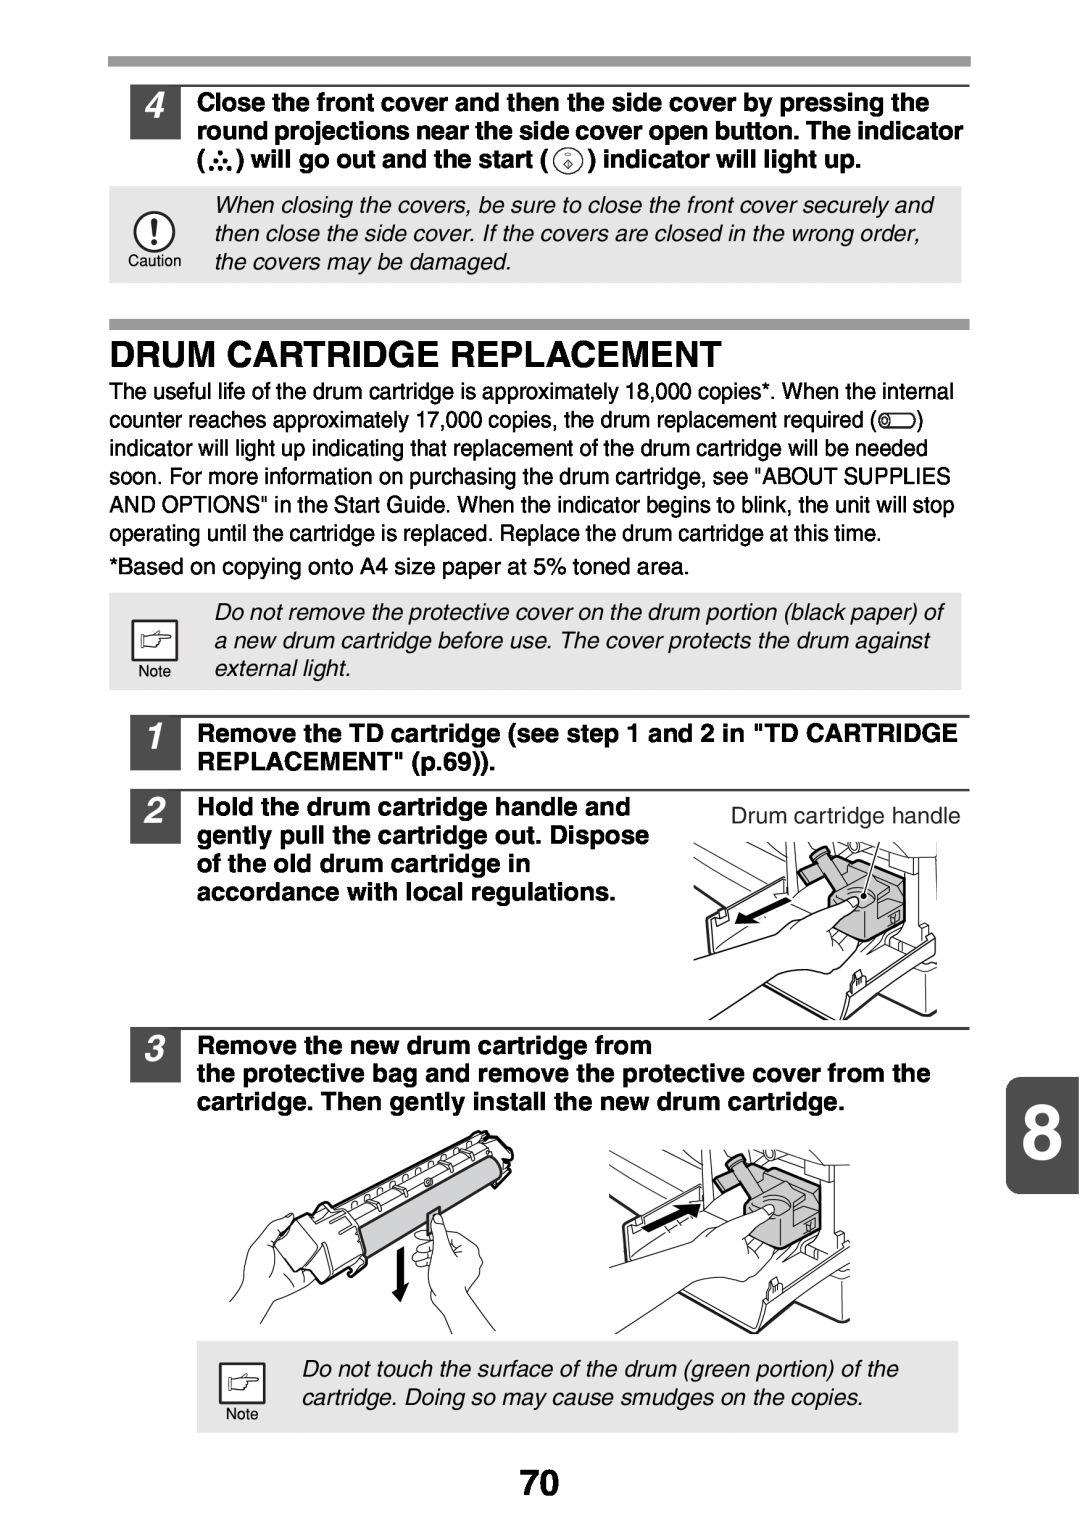 Sharp AL2041 manual Drum Cartridge Replacement, Hold the drum cartridge handle and, gently pull the cartridge out. Dispose 